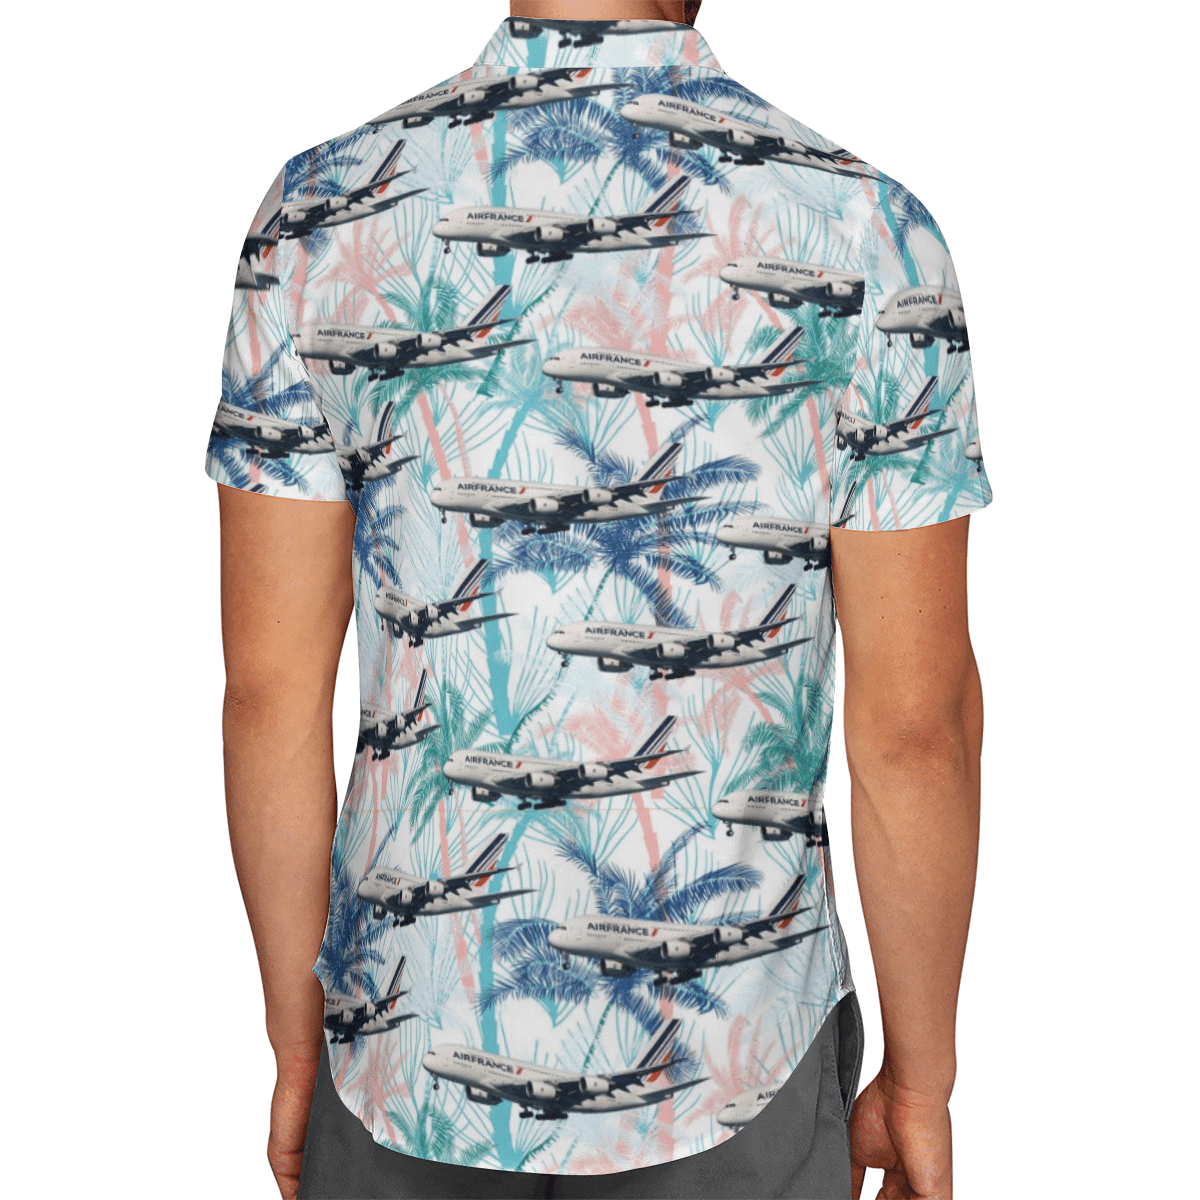 Going to the beach with a quality shirt 192